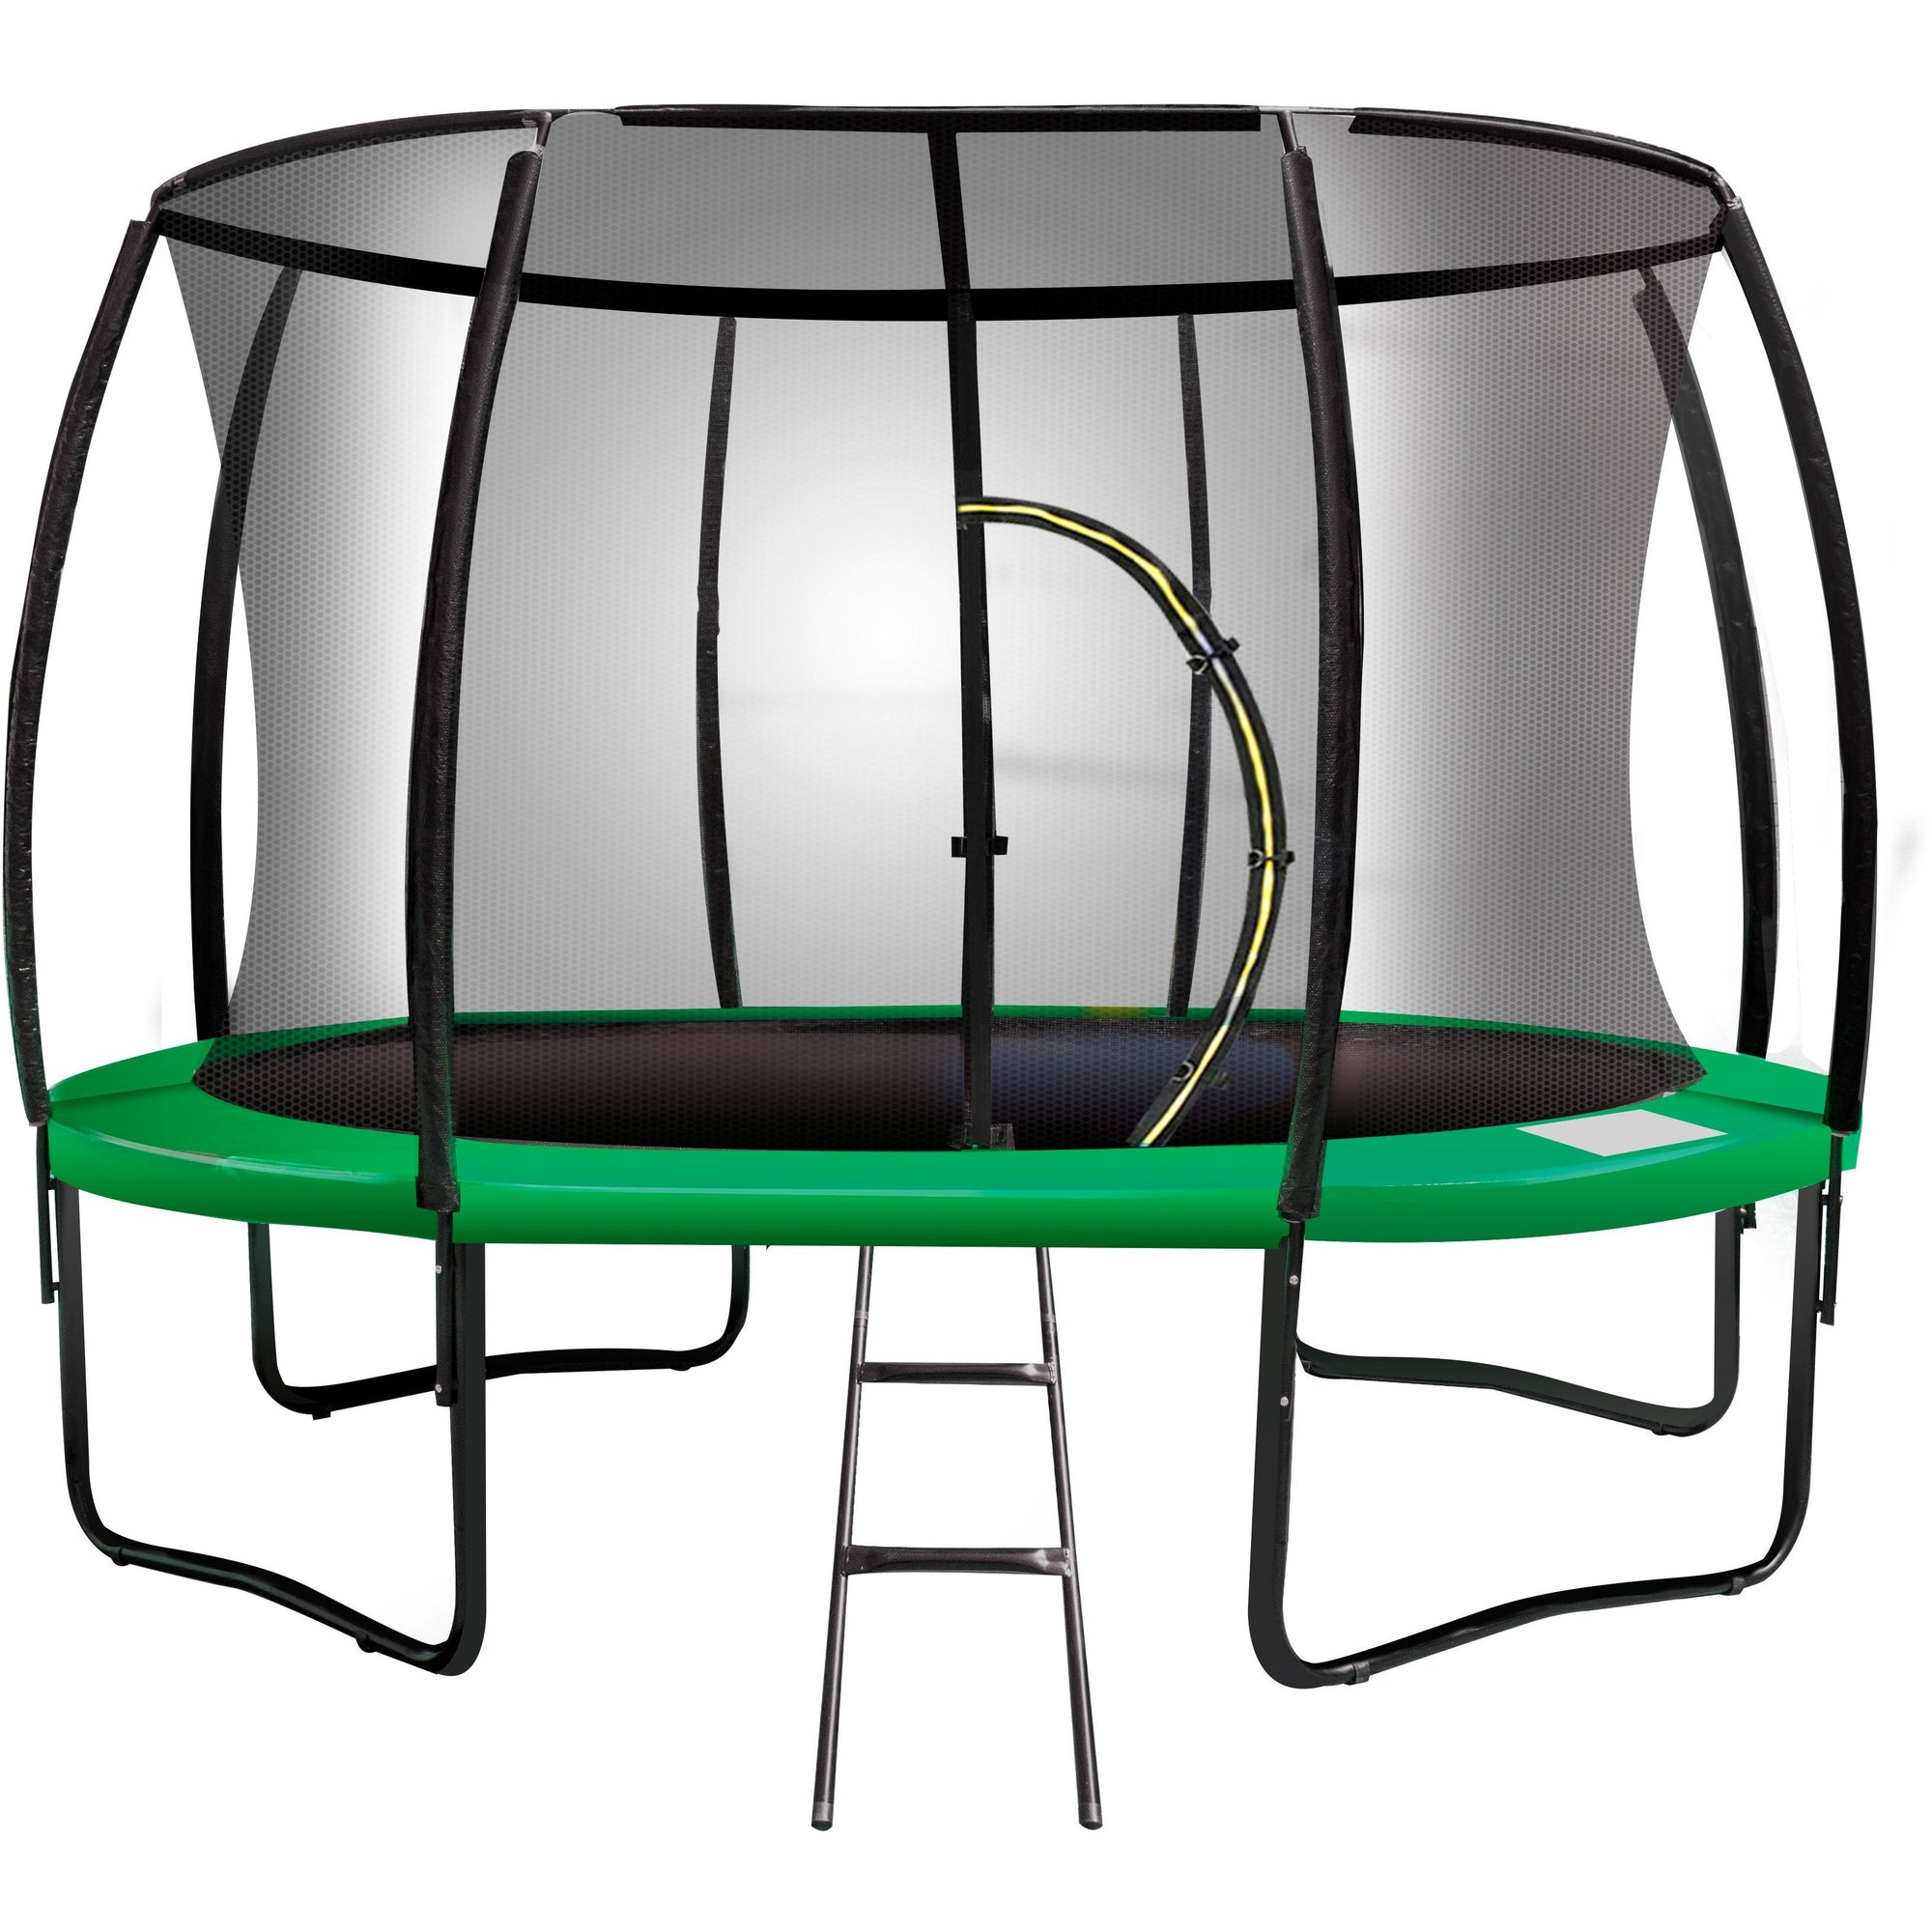 Kahuna 14ft Trampoline Free Ladder Spring Mat Net Safety Pad Cover Round Enclosure - Green